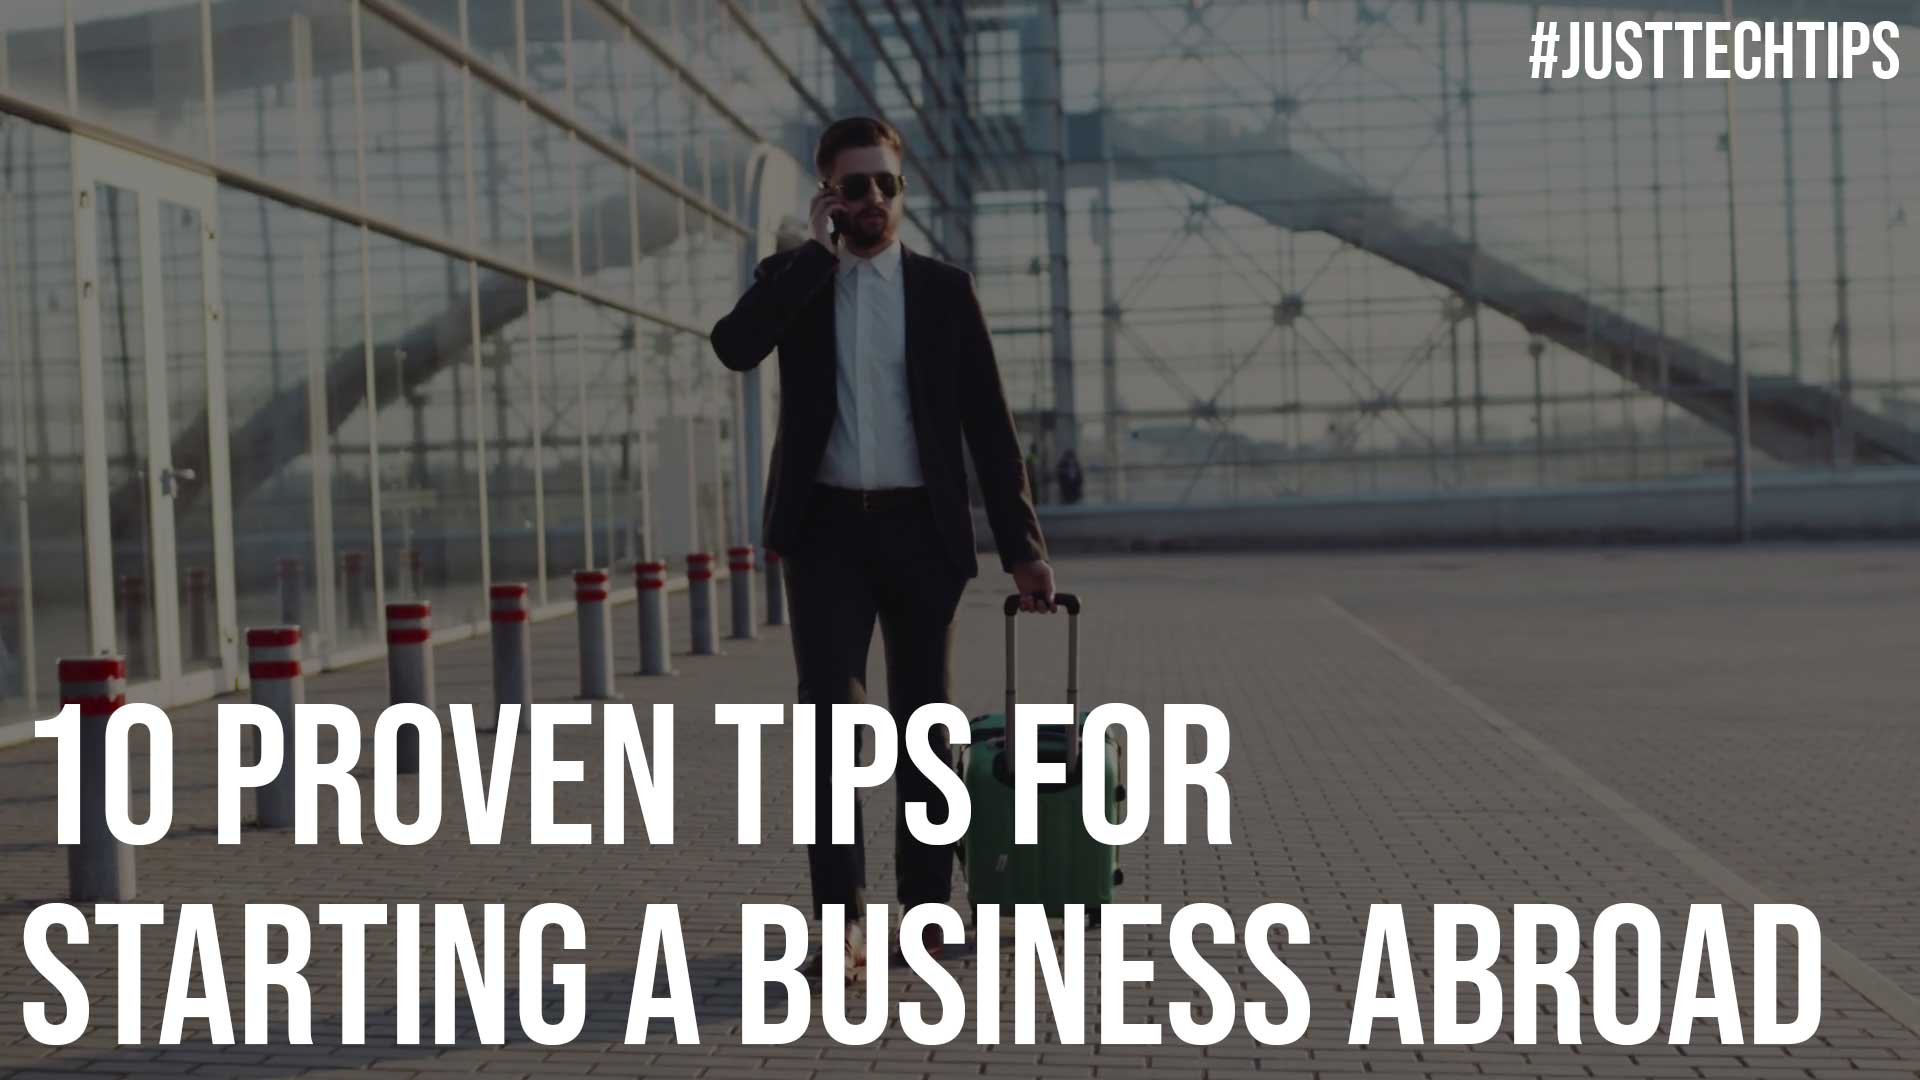 10 Proven Tips for Starting a Business Abroad